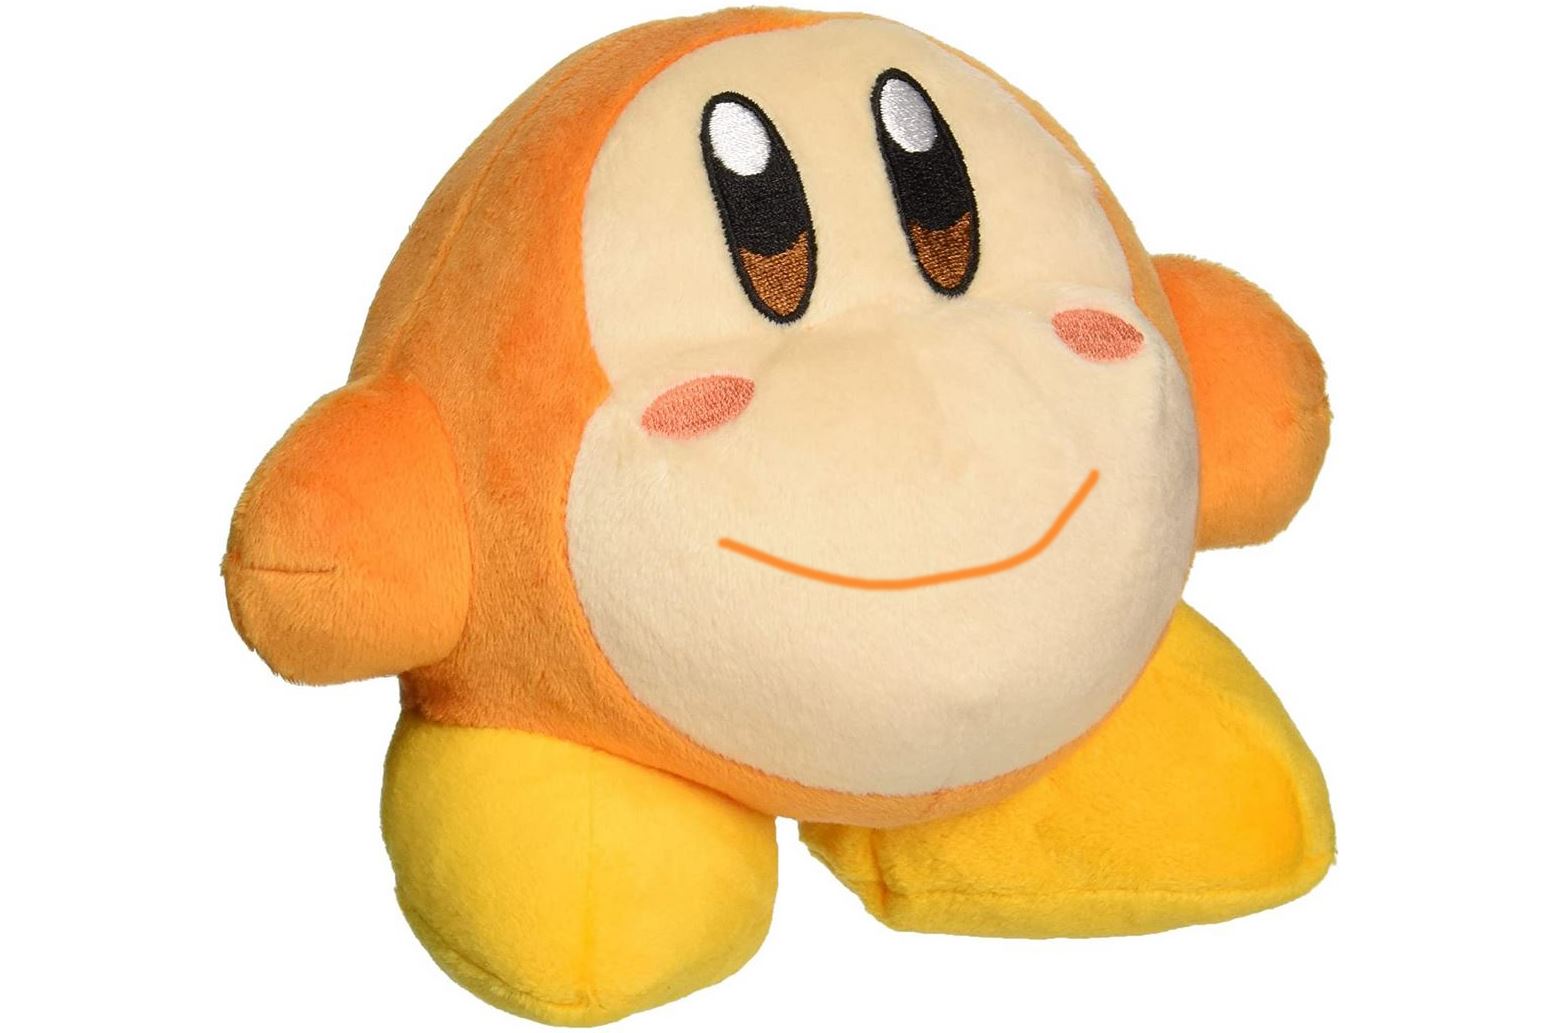 Cheap Ass Gamer on X: Use code KIRBYMICROSITE at Waddle Dee